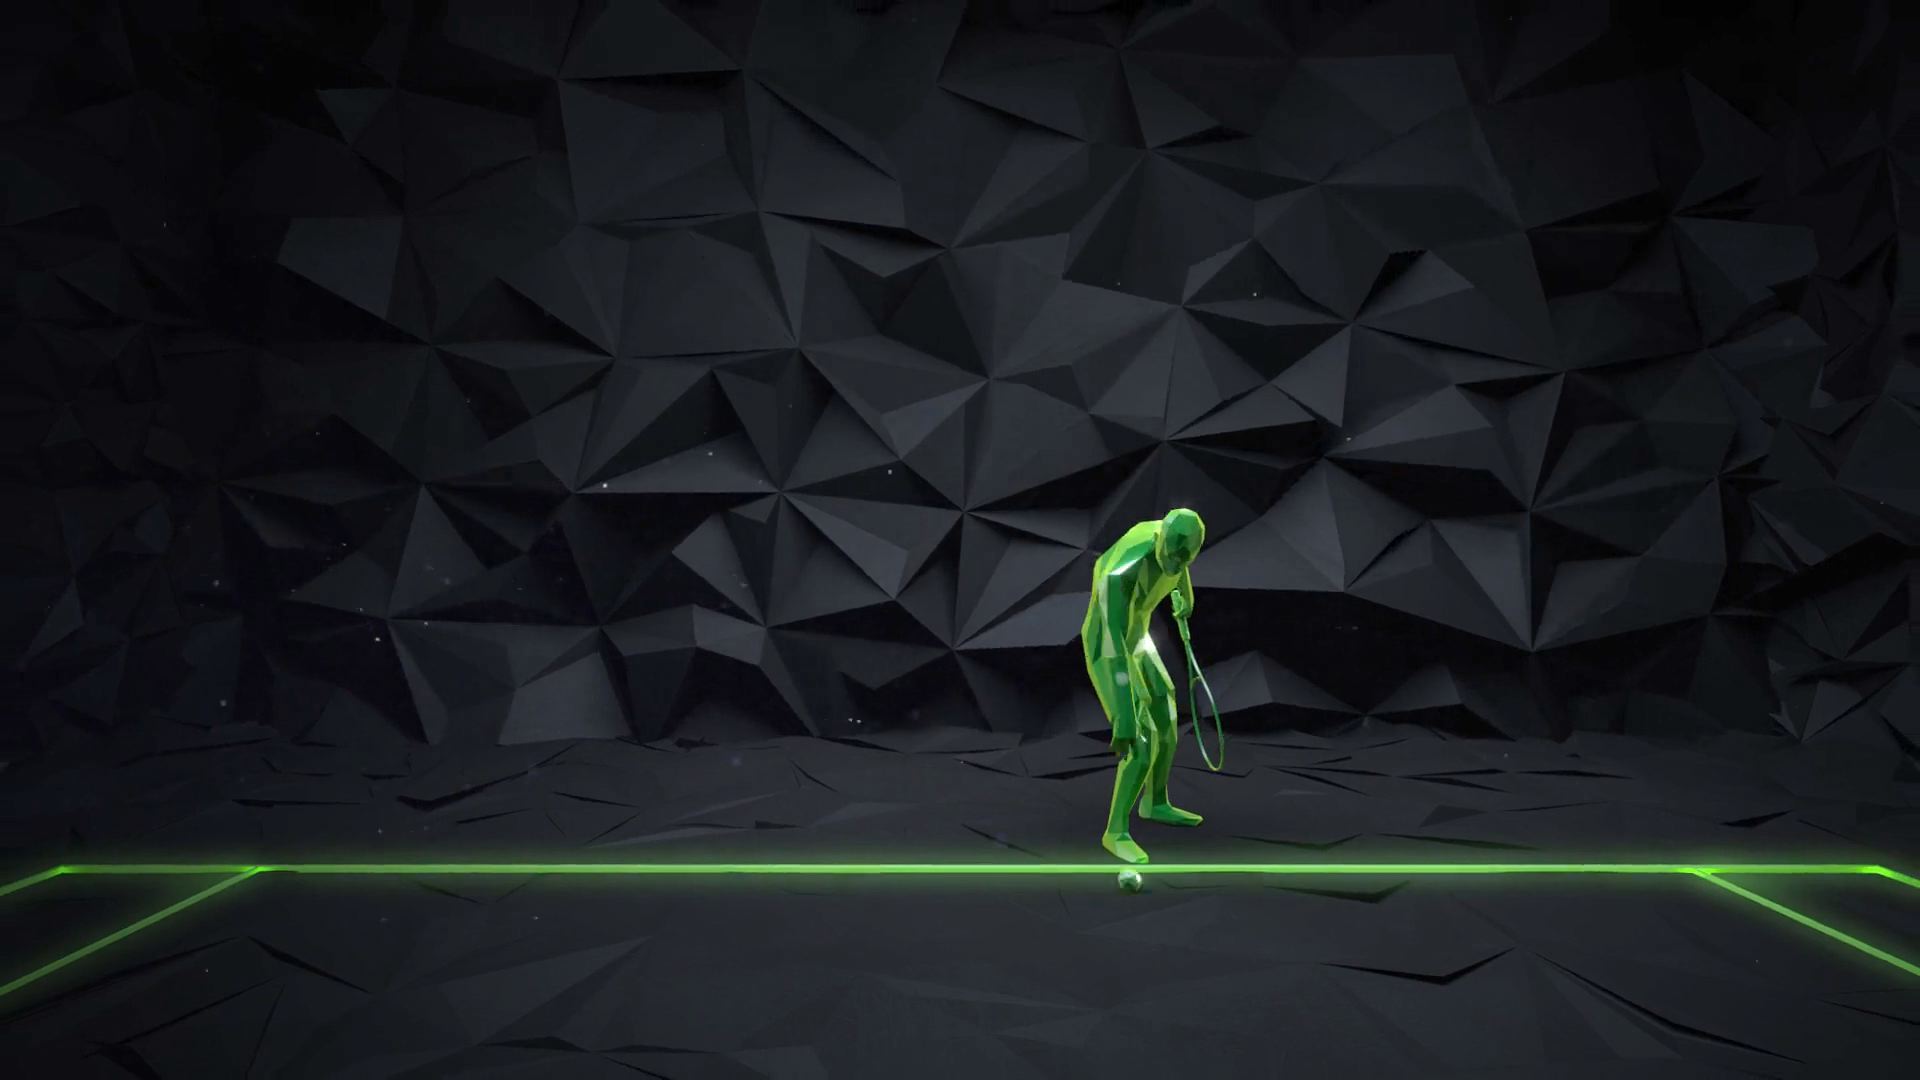 3D animated tennis player bouncing the ball.